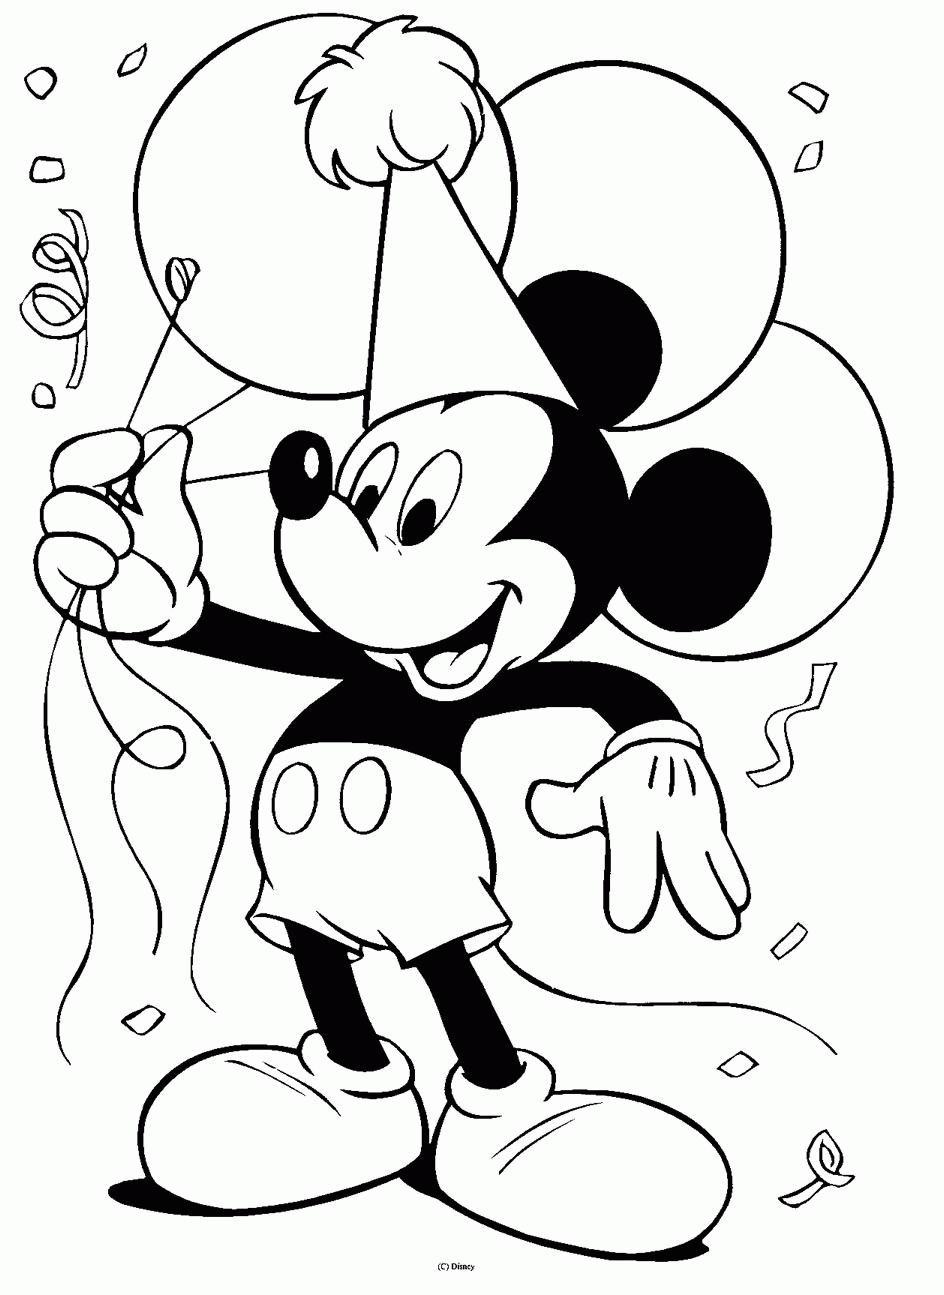 Ultimate pictures mix: Disney coloring pages